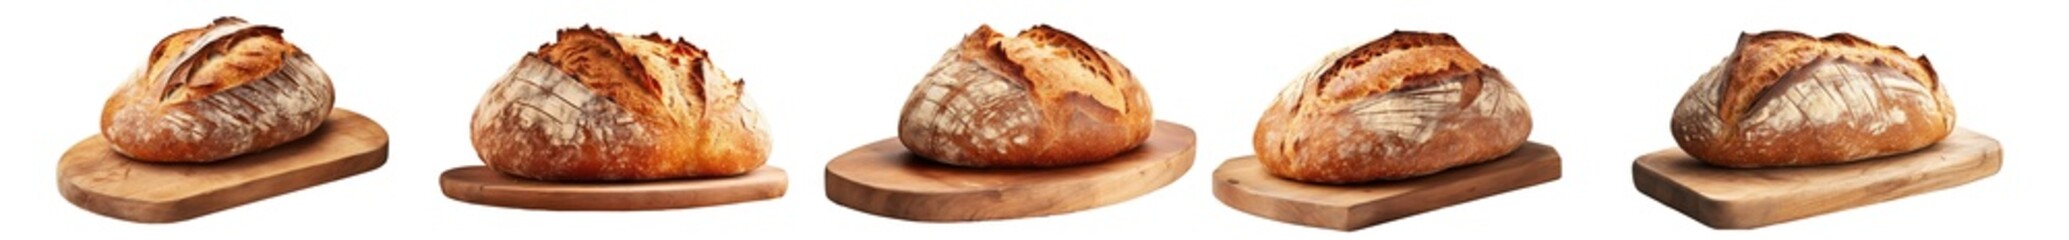 collection of a round loaf of freshly baked homemade artisan sourdough bread on a round wood plank